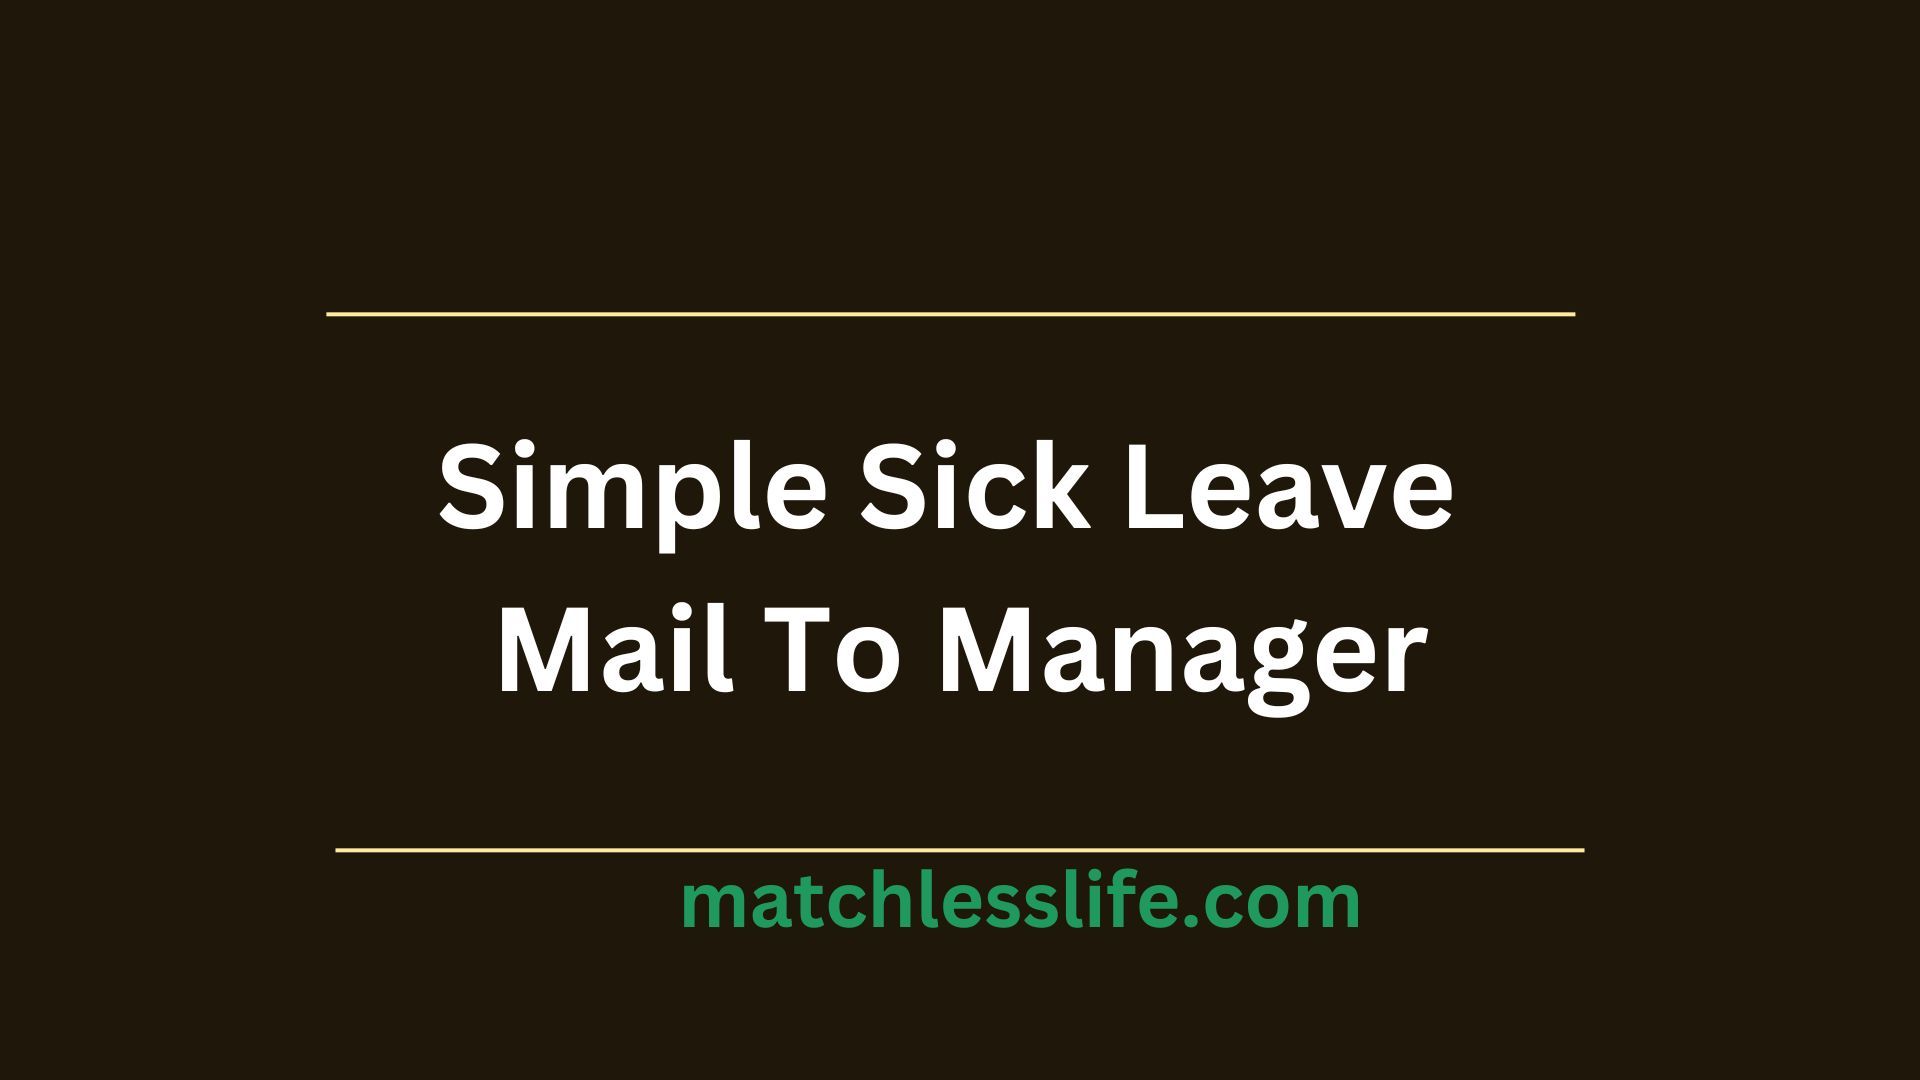 Simple Sick Leave Mail To Manager